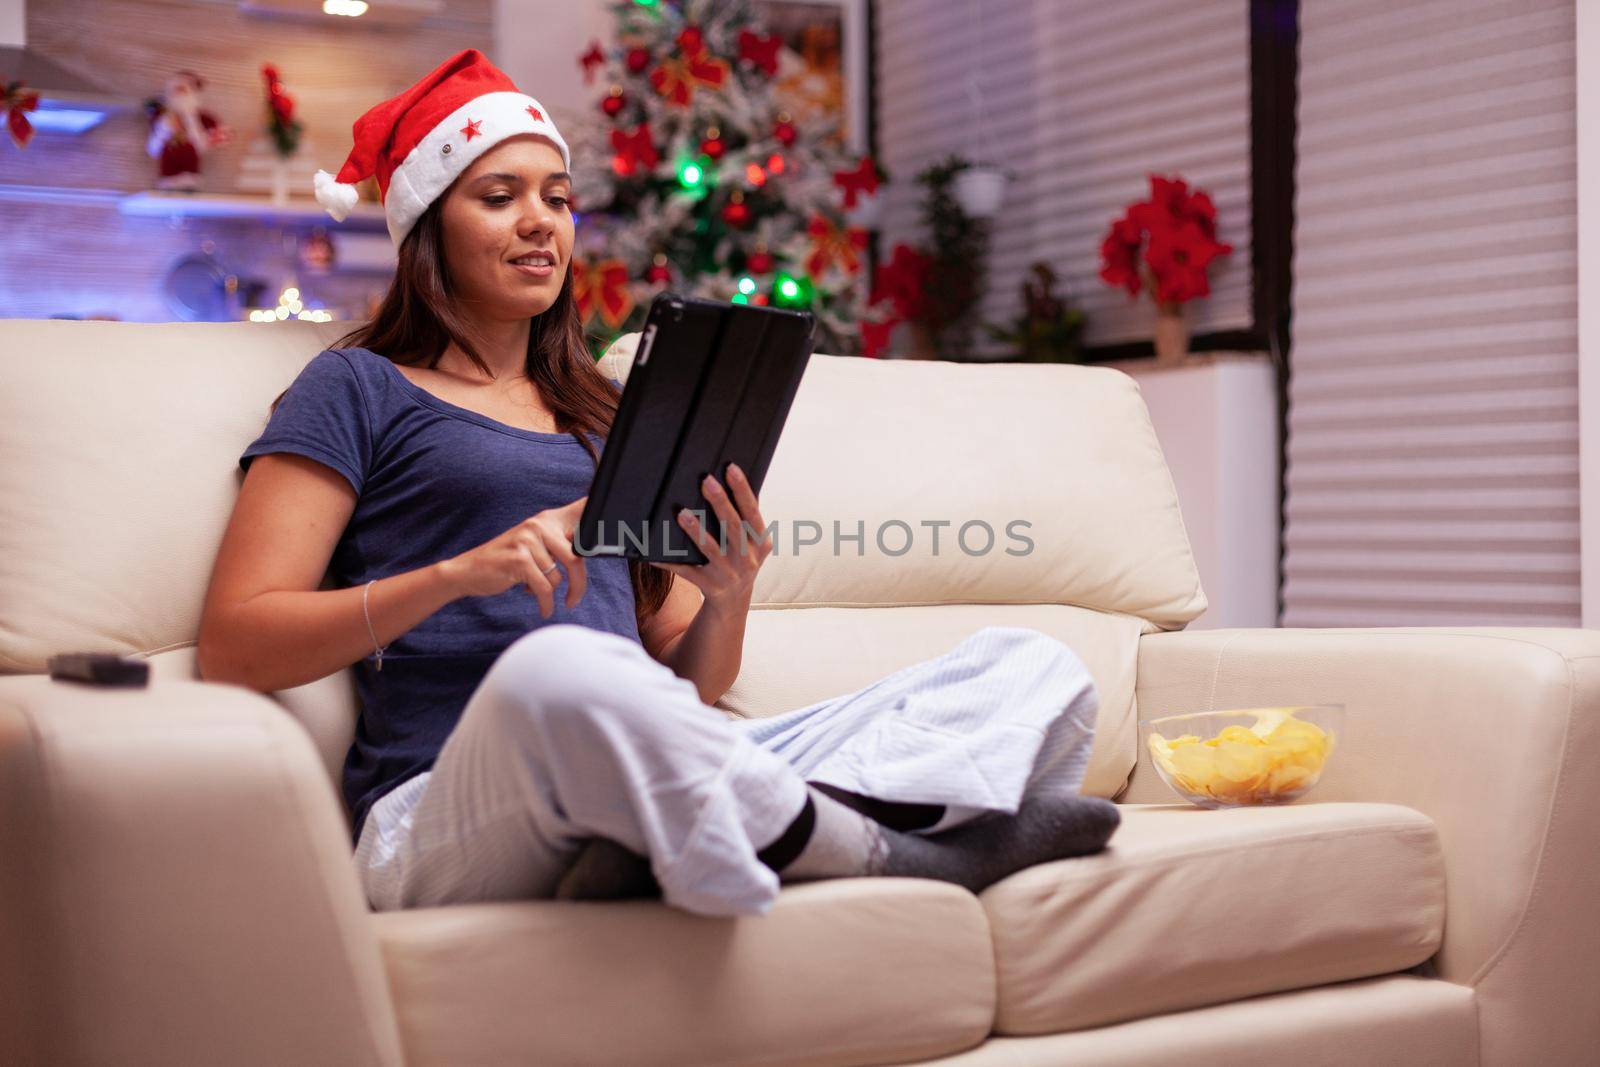 Woman sitting in lotus position on sofa browsing on social media writing xmas email by DCStudio